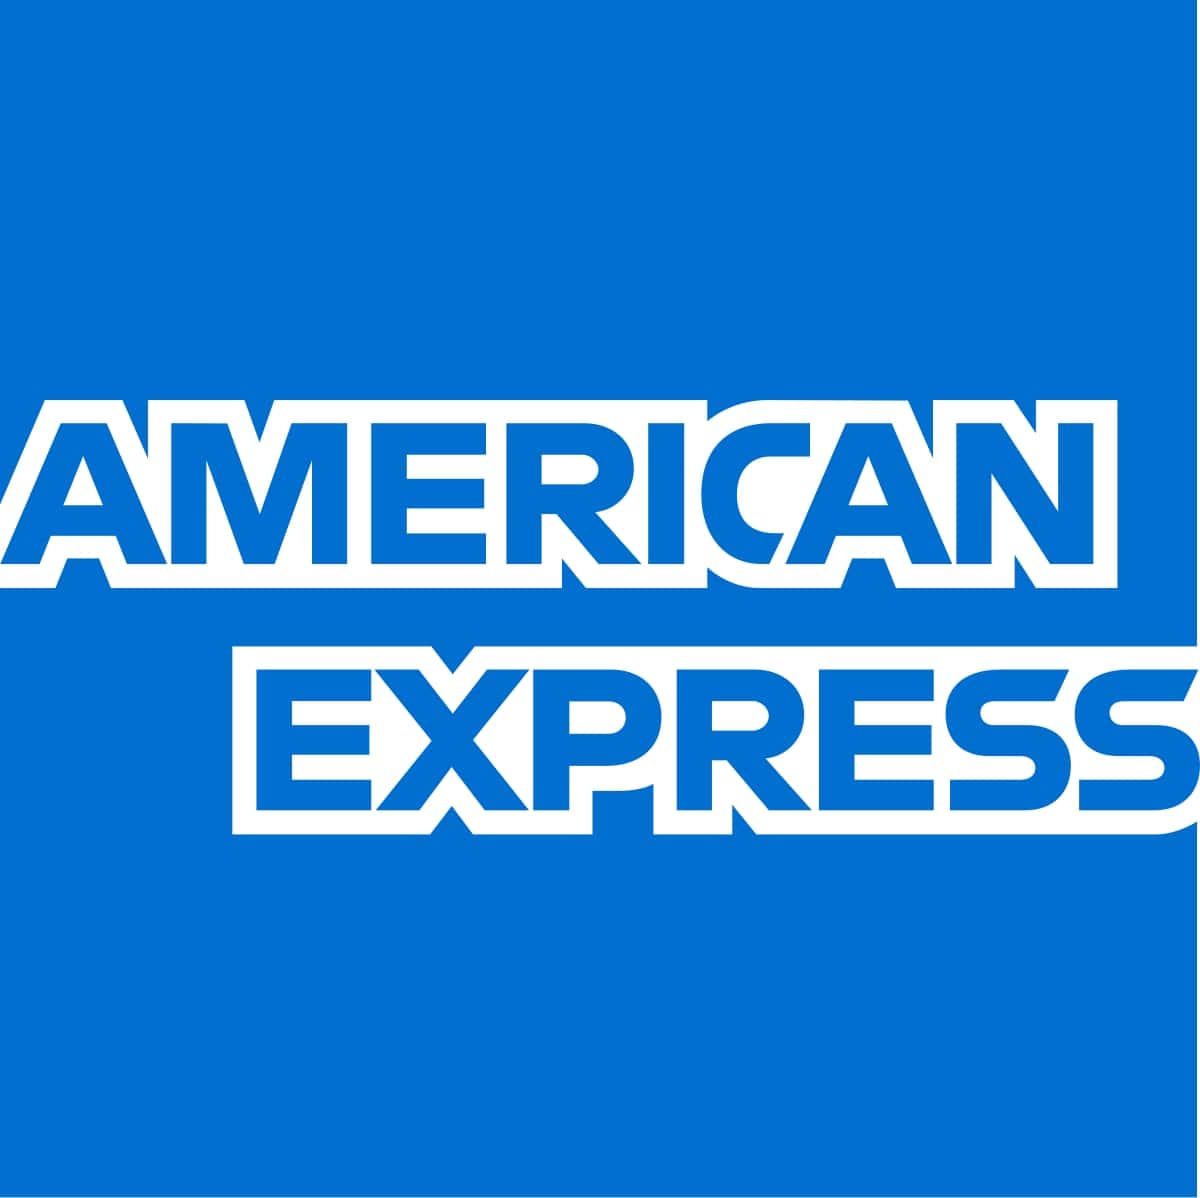 american express global business travel us address